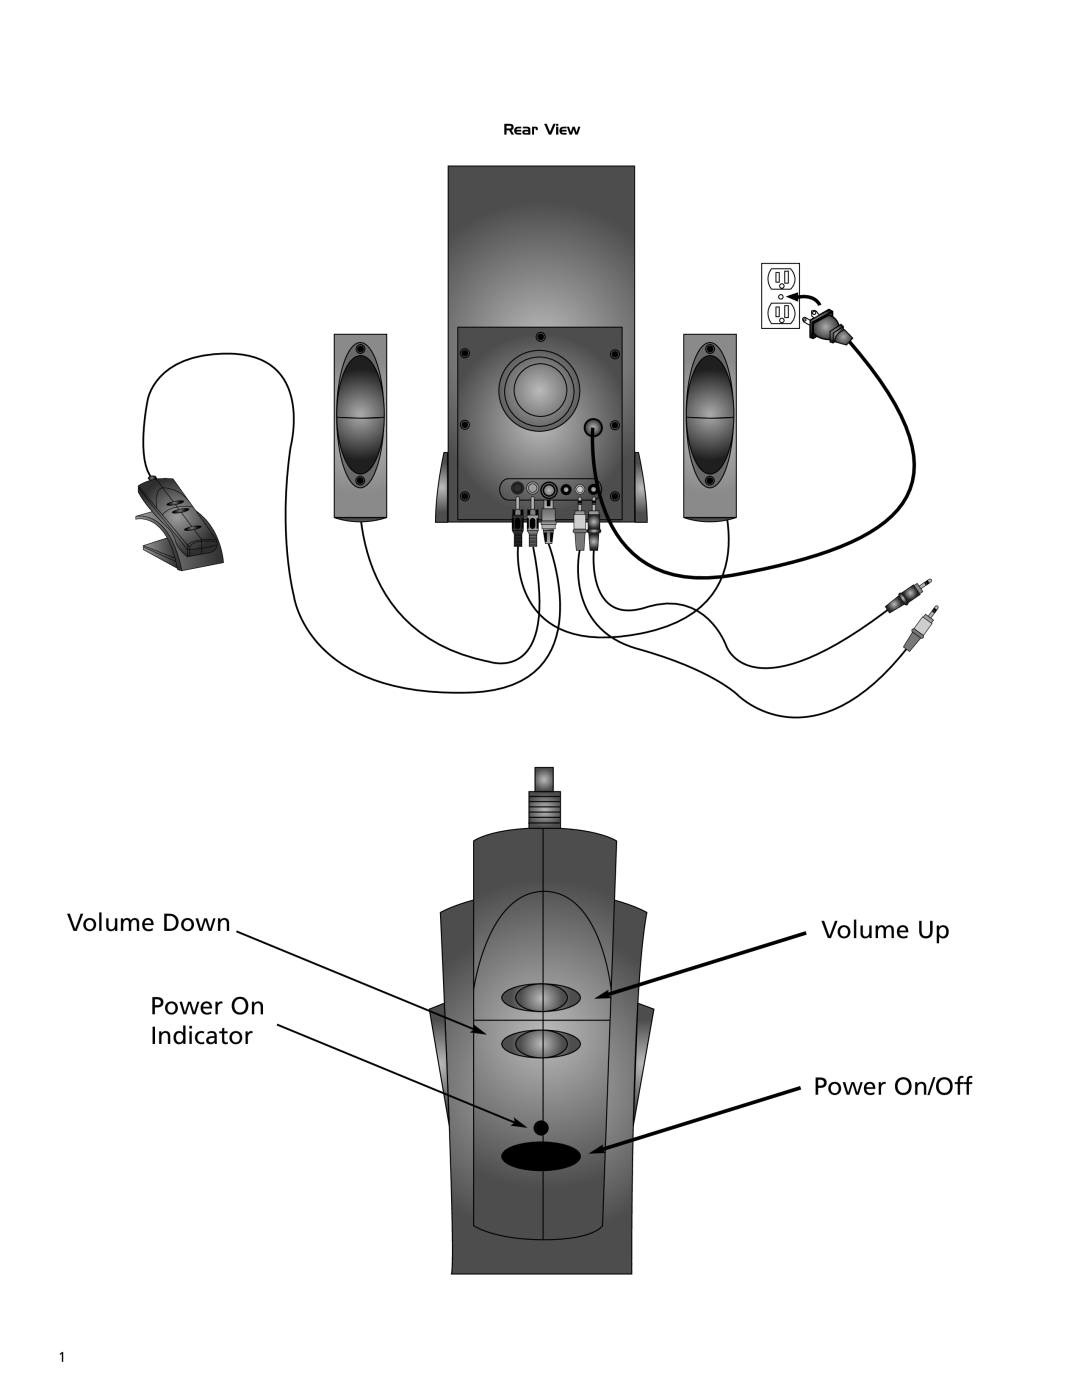 Altec Lansing 2100 manual Volume Down Power On Indicator, Volume Up Power On/Off, Rear View 